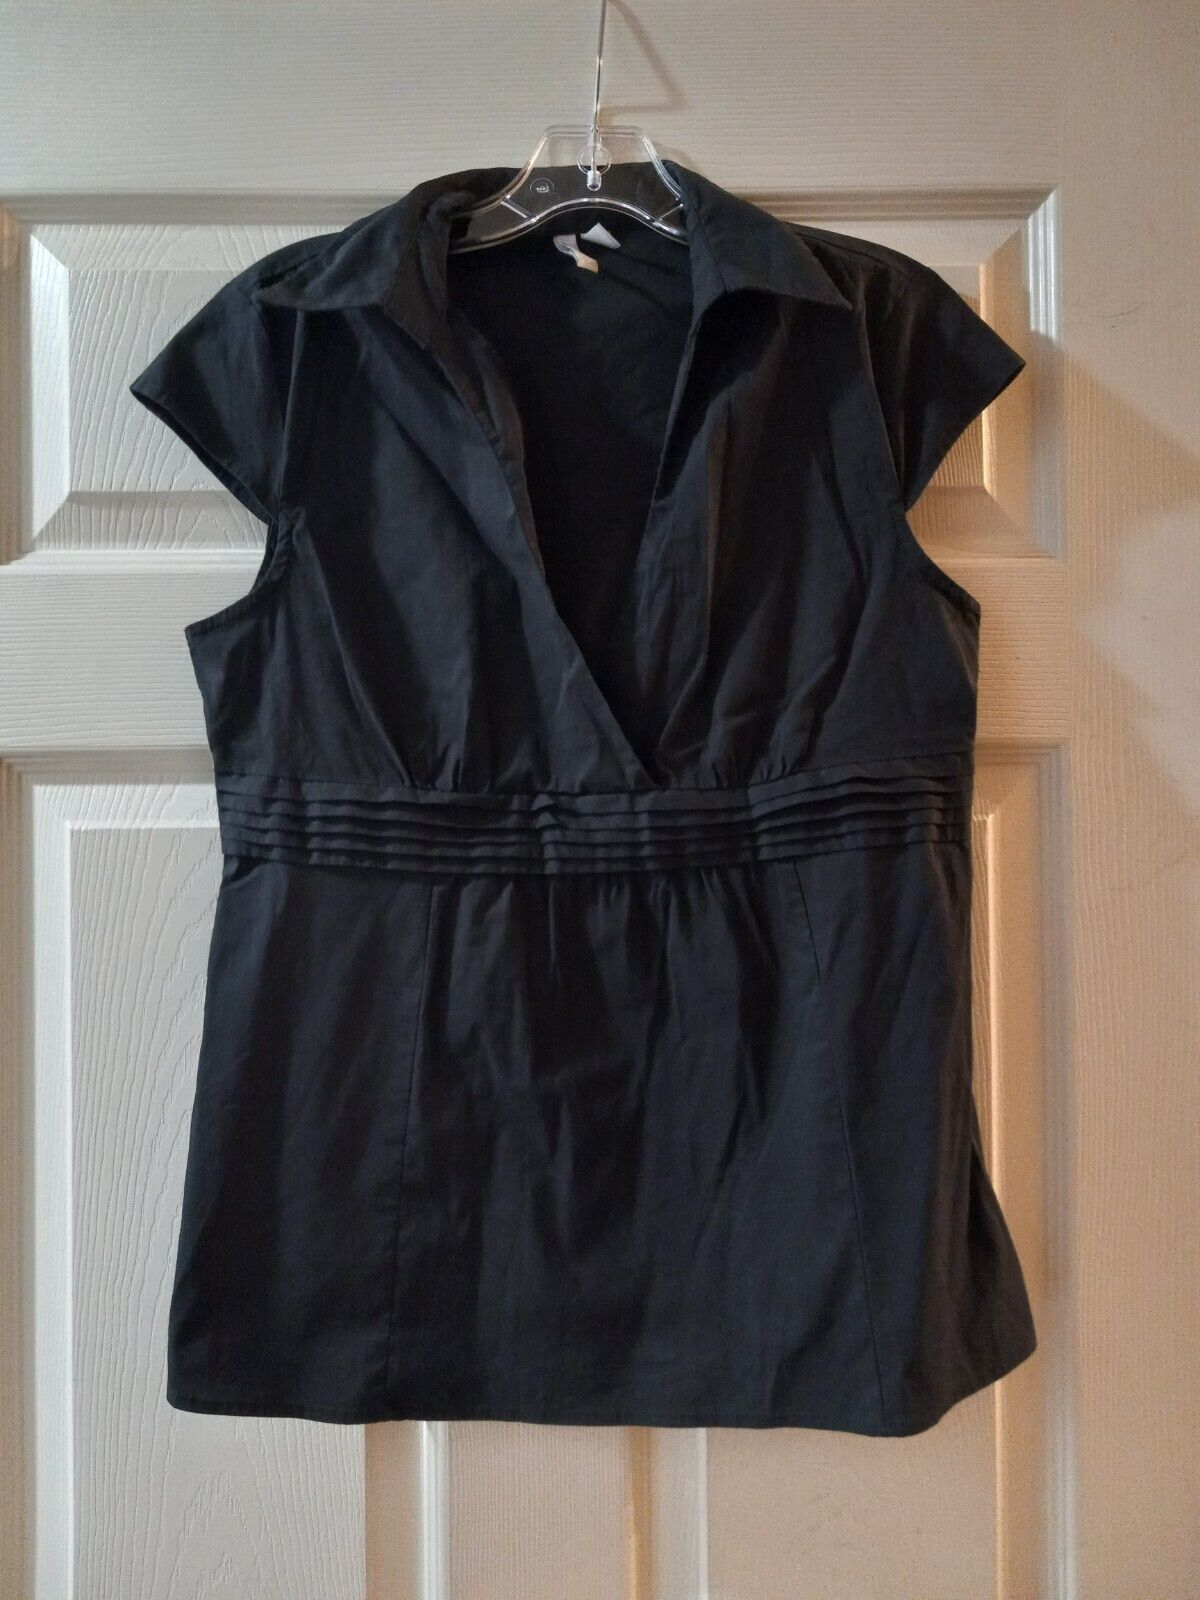 Primary image for Old Navy Women Short Sleeve Top Shirt Size Medium